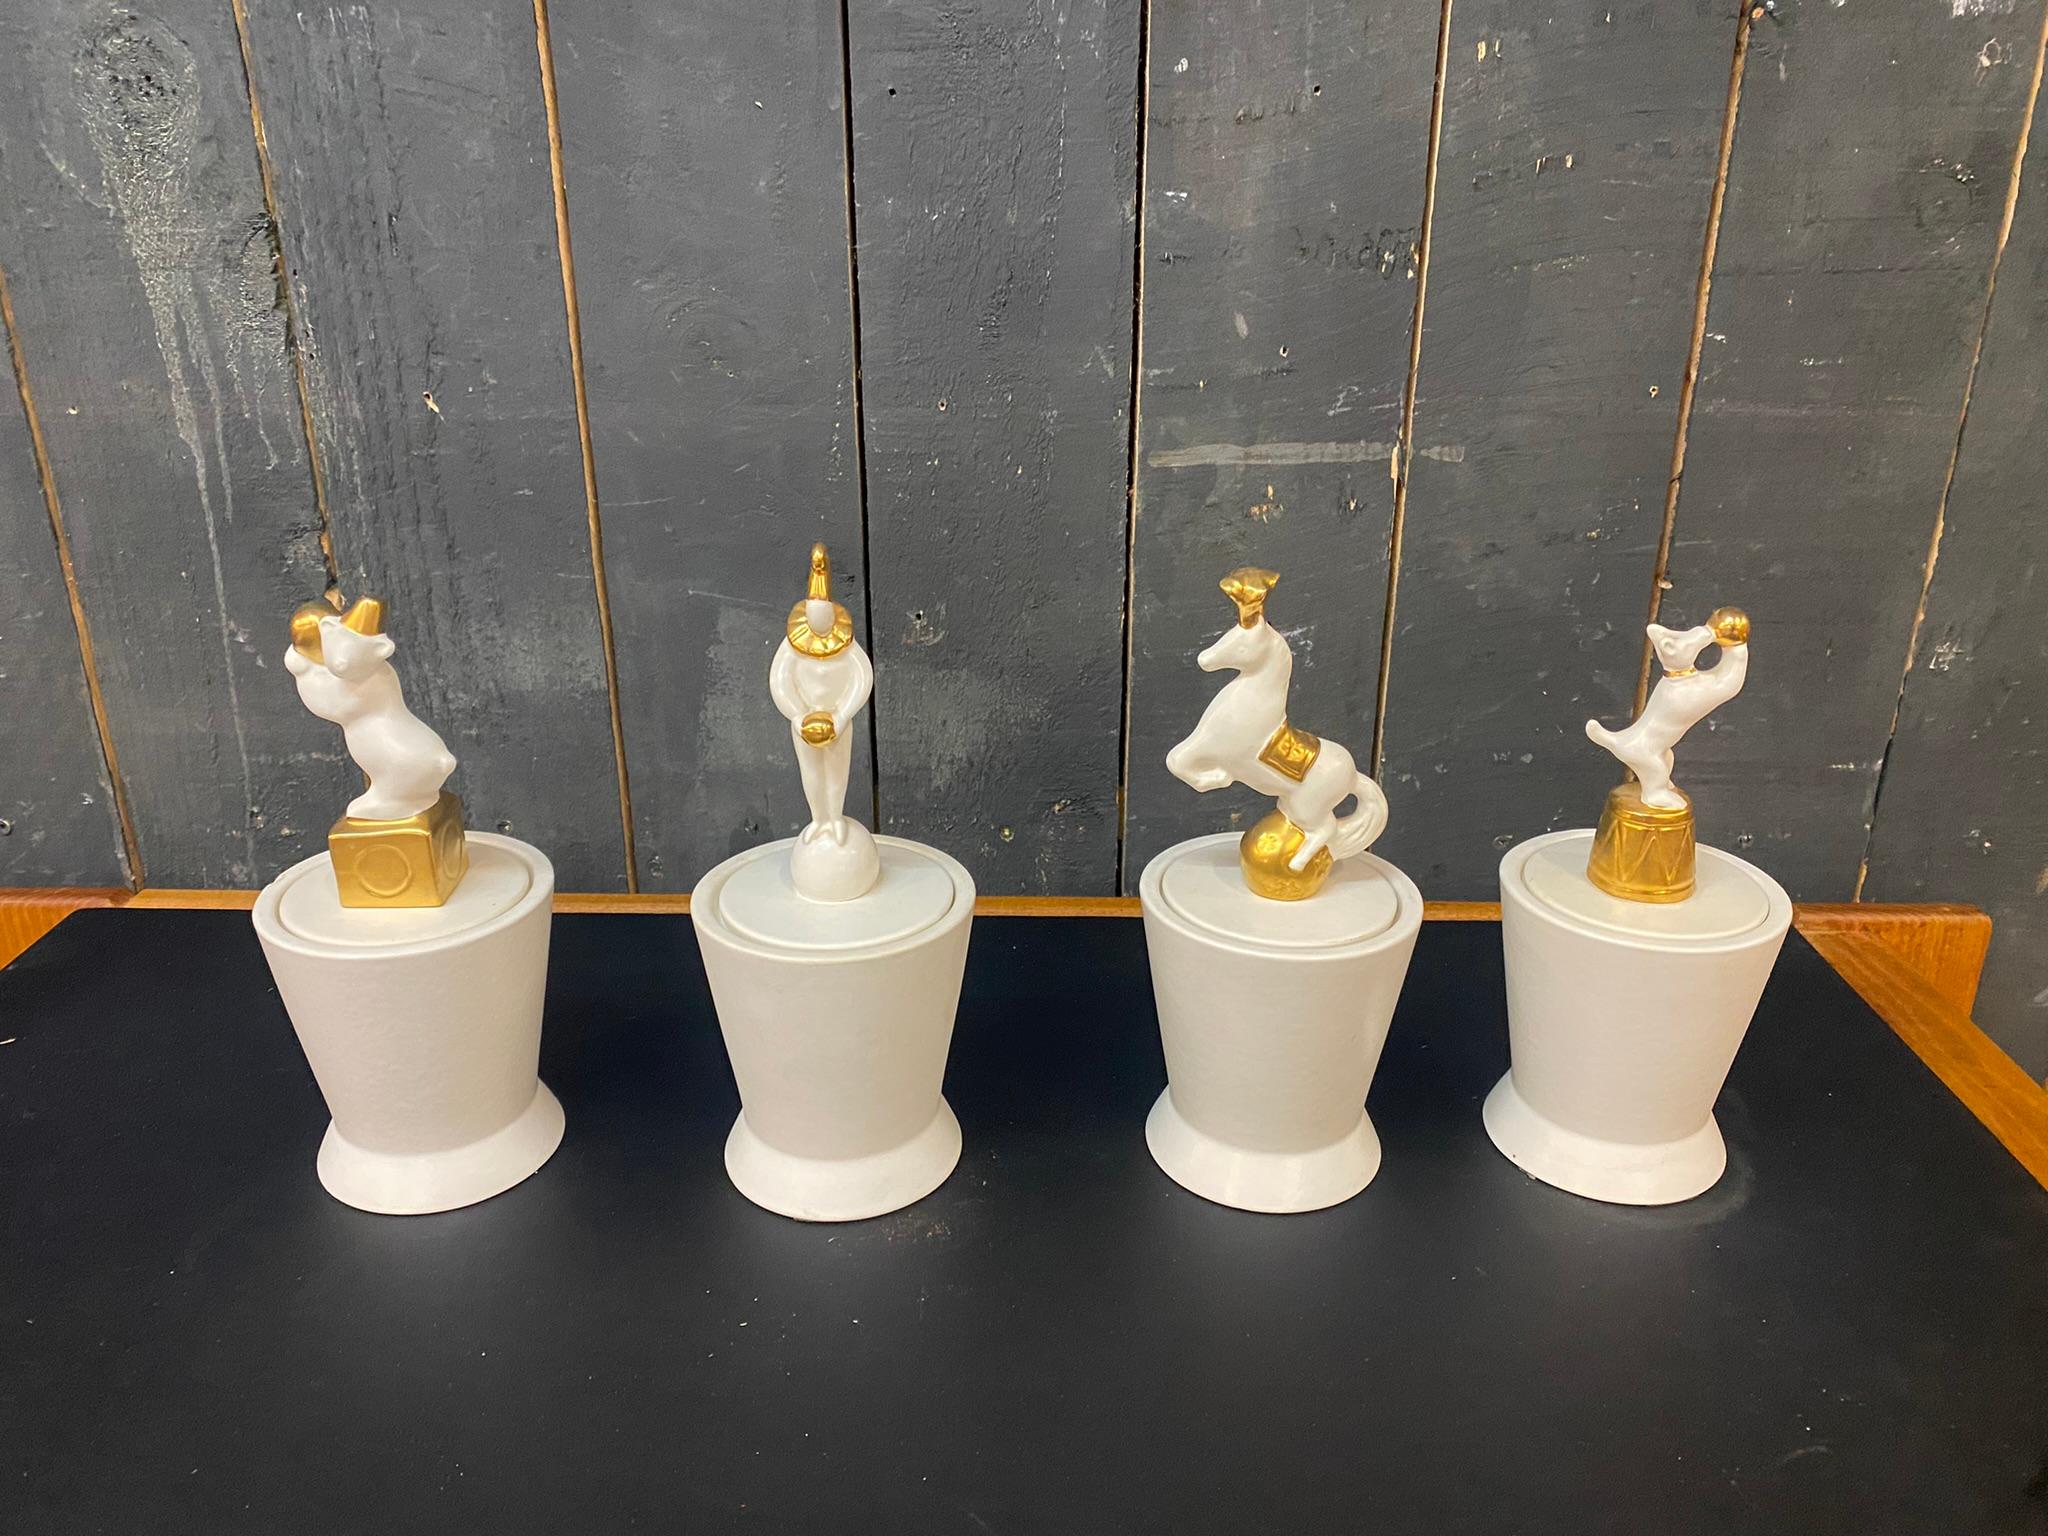 Jean bOGGIO, suite of 4 covered pots on the theme of the circus, Edition Les Héritiers France.